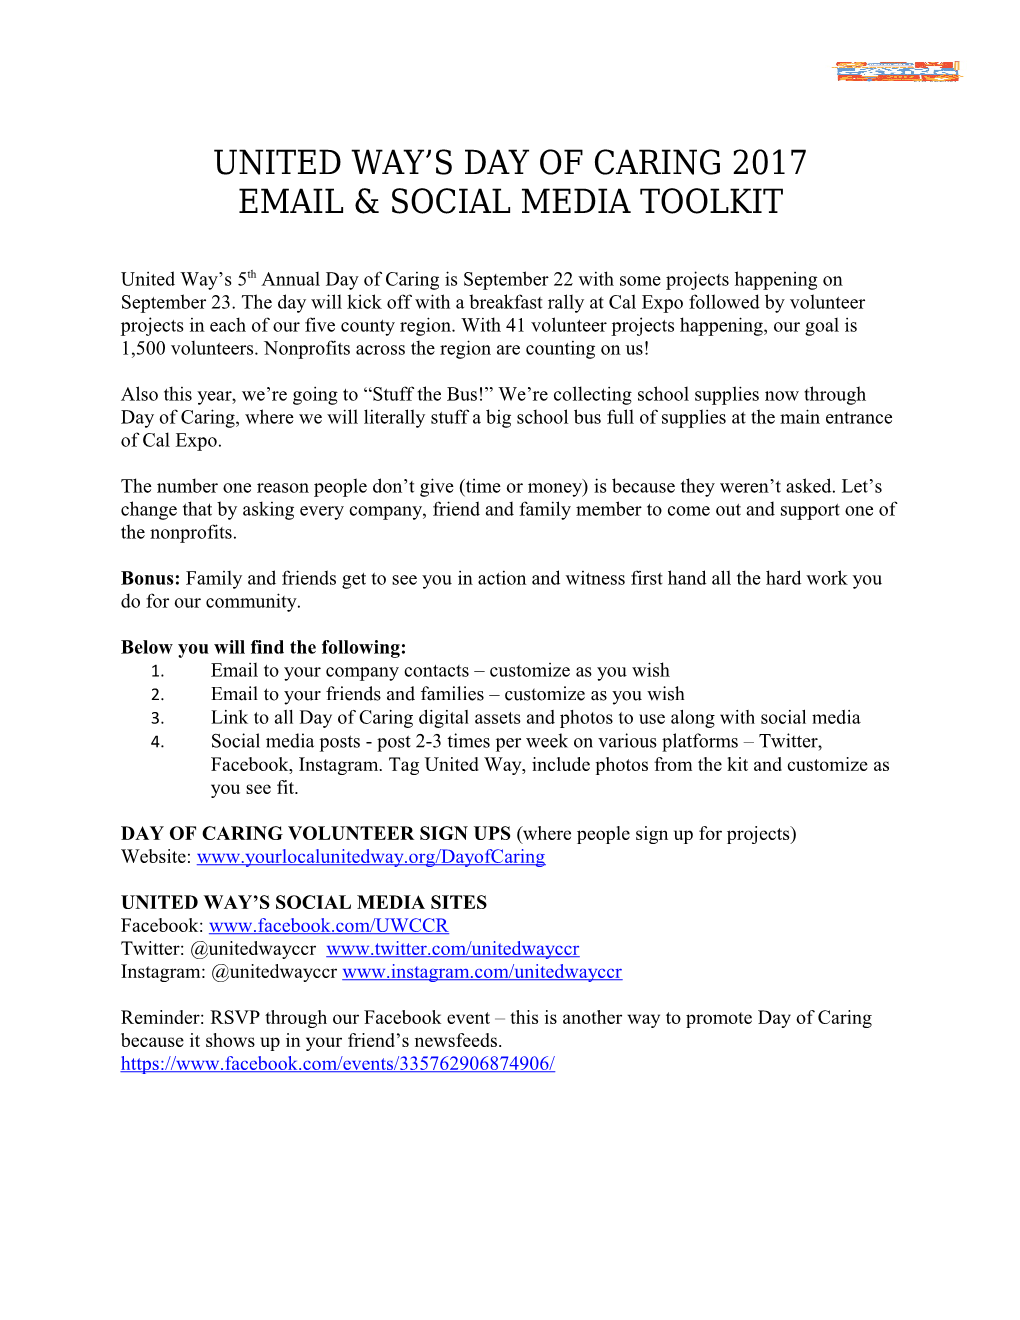 United Way S Day of Caring 2017 Email Social Media Toolkit